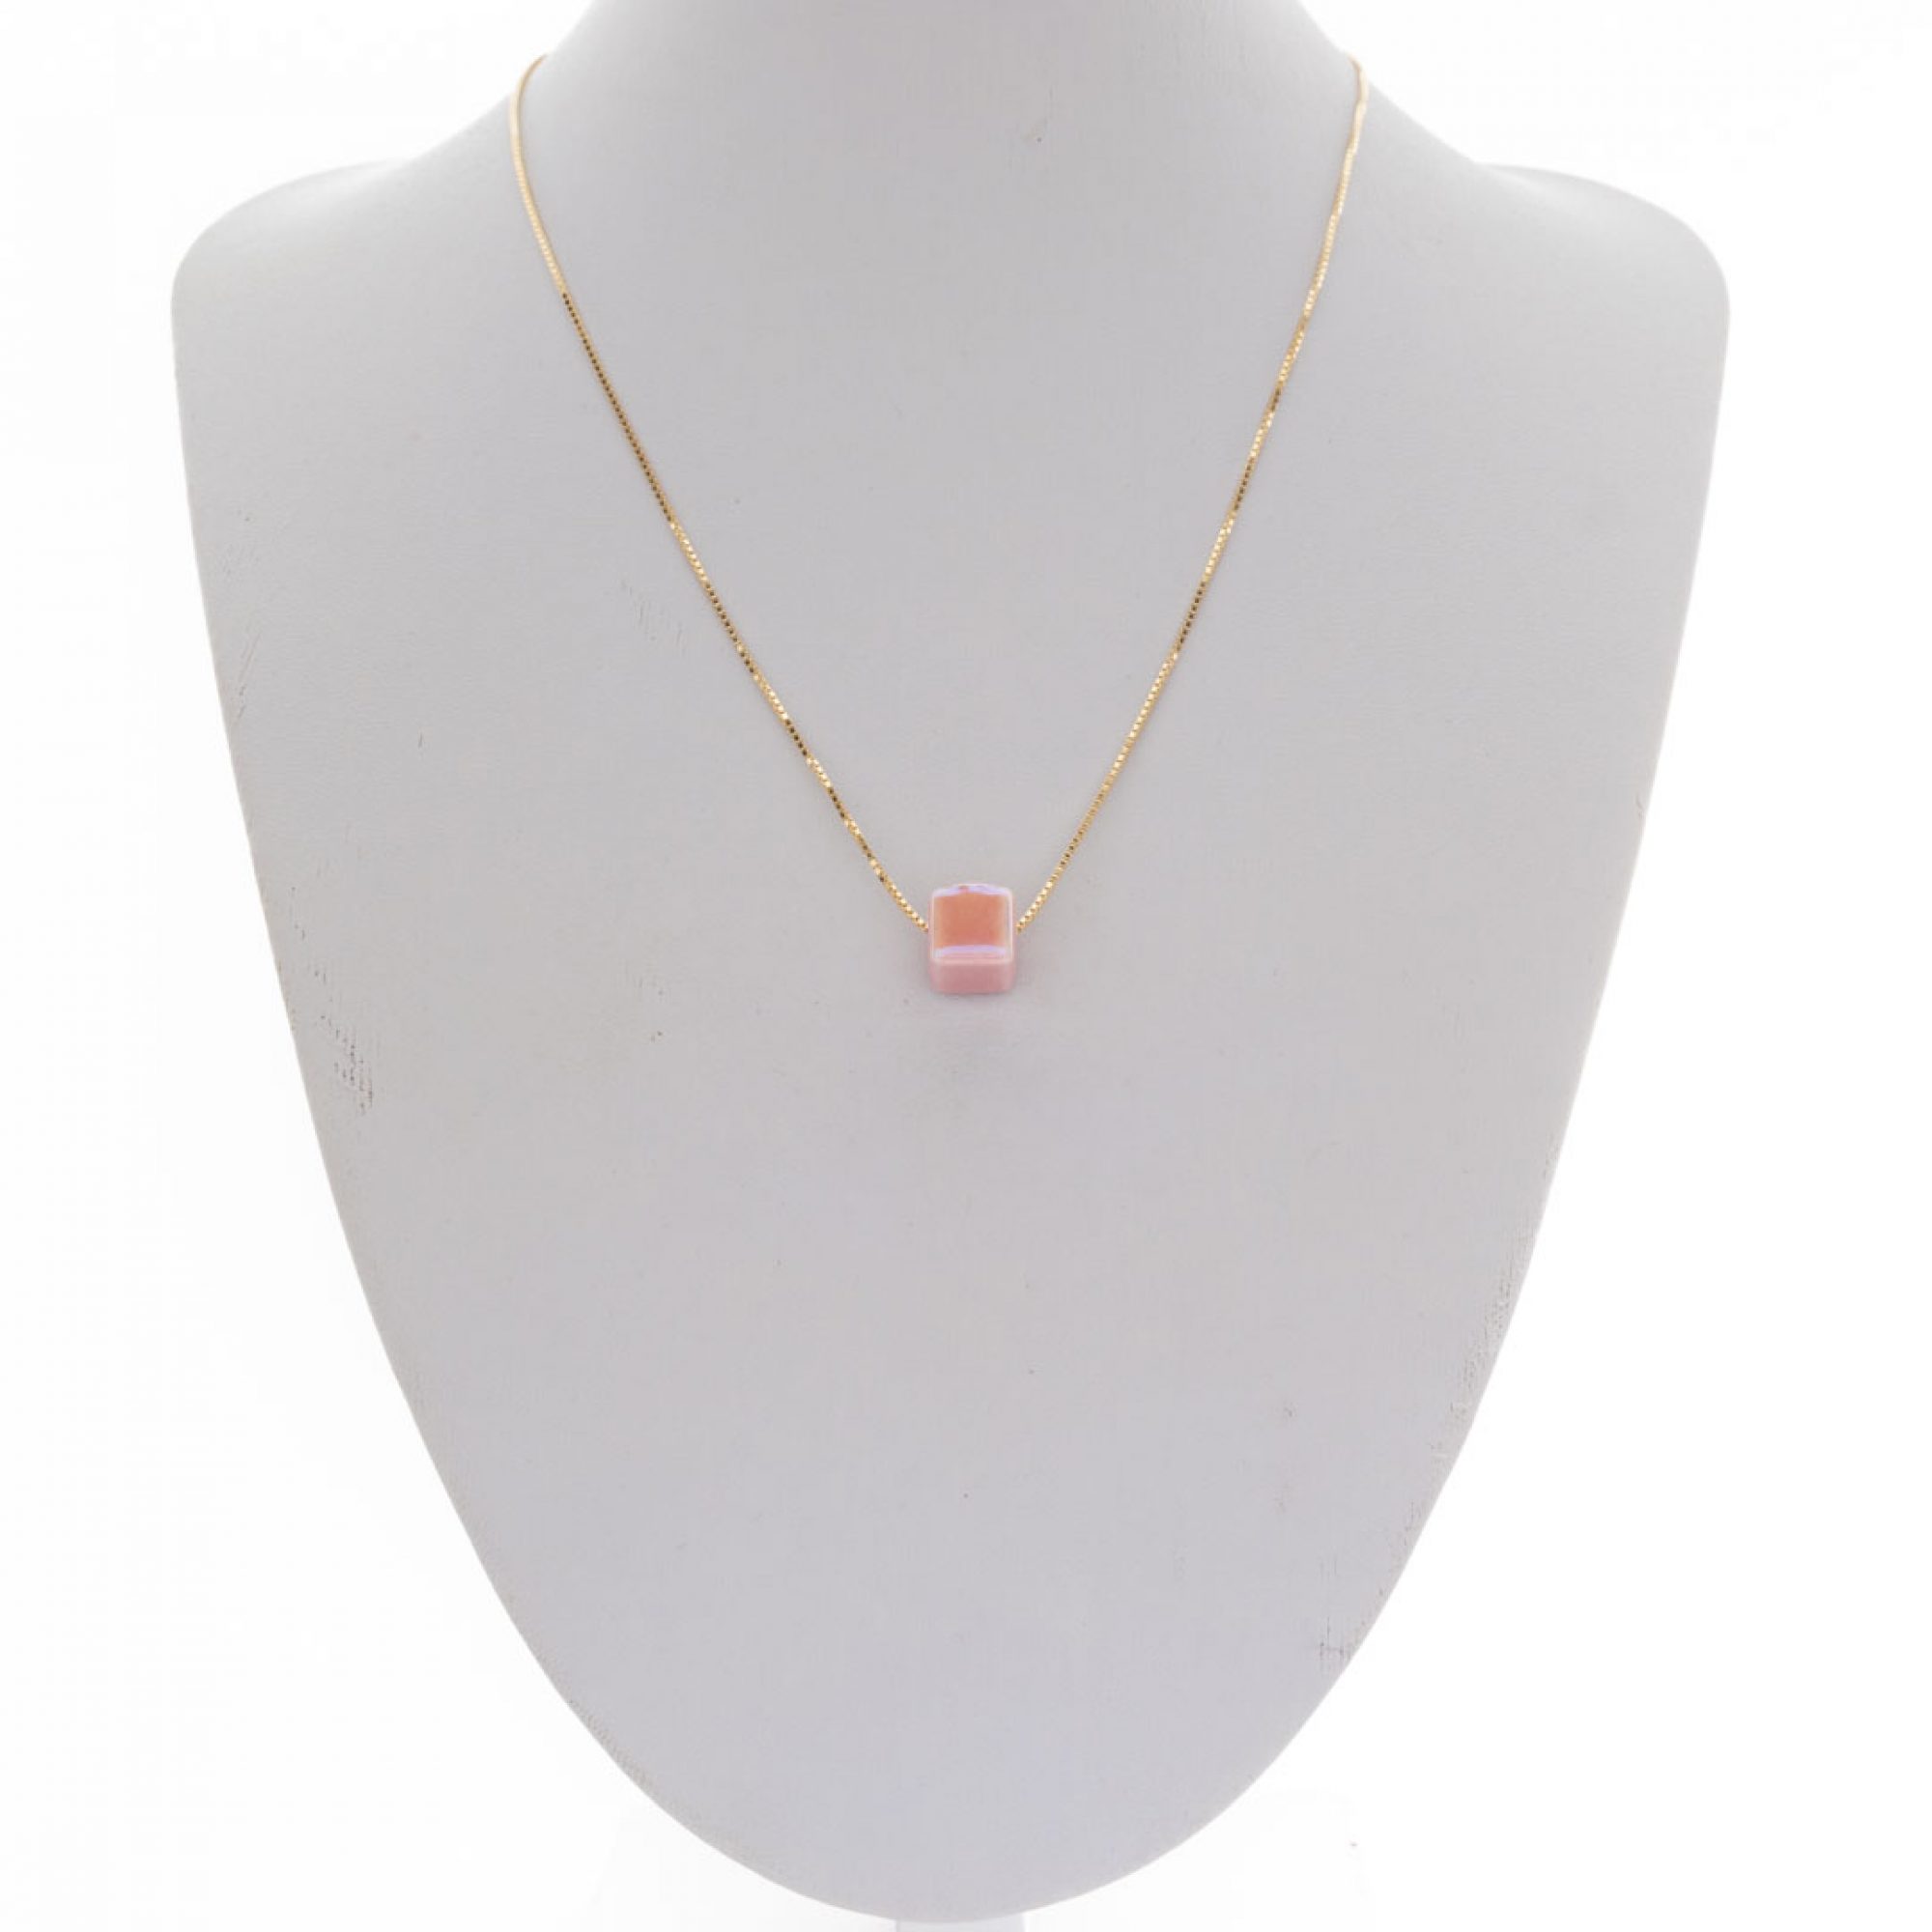 Gold plated pink bead necklace